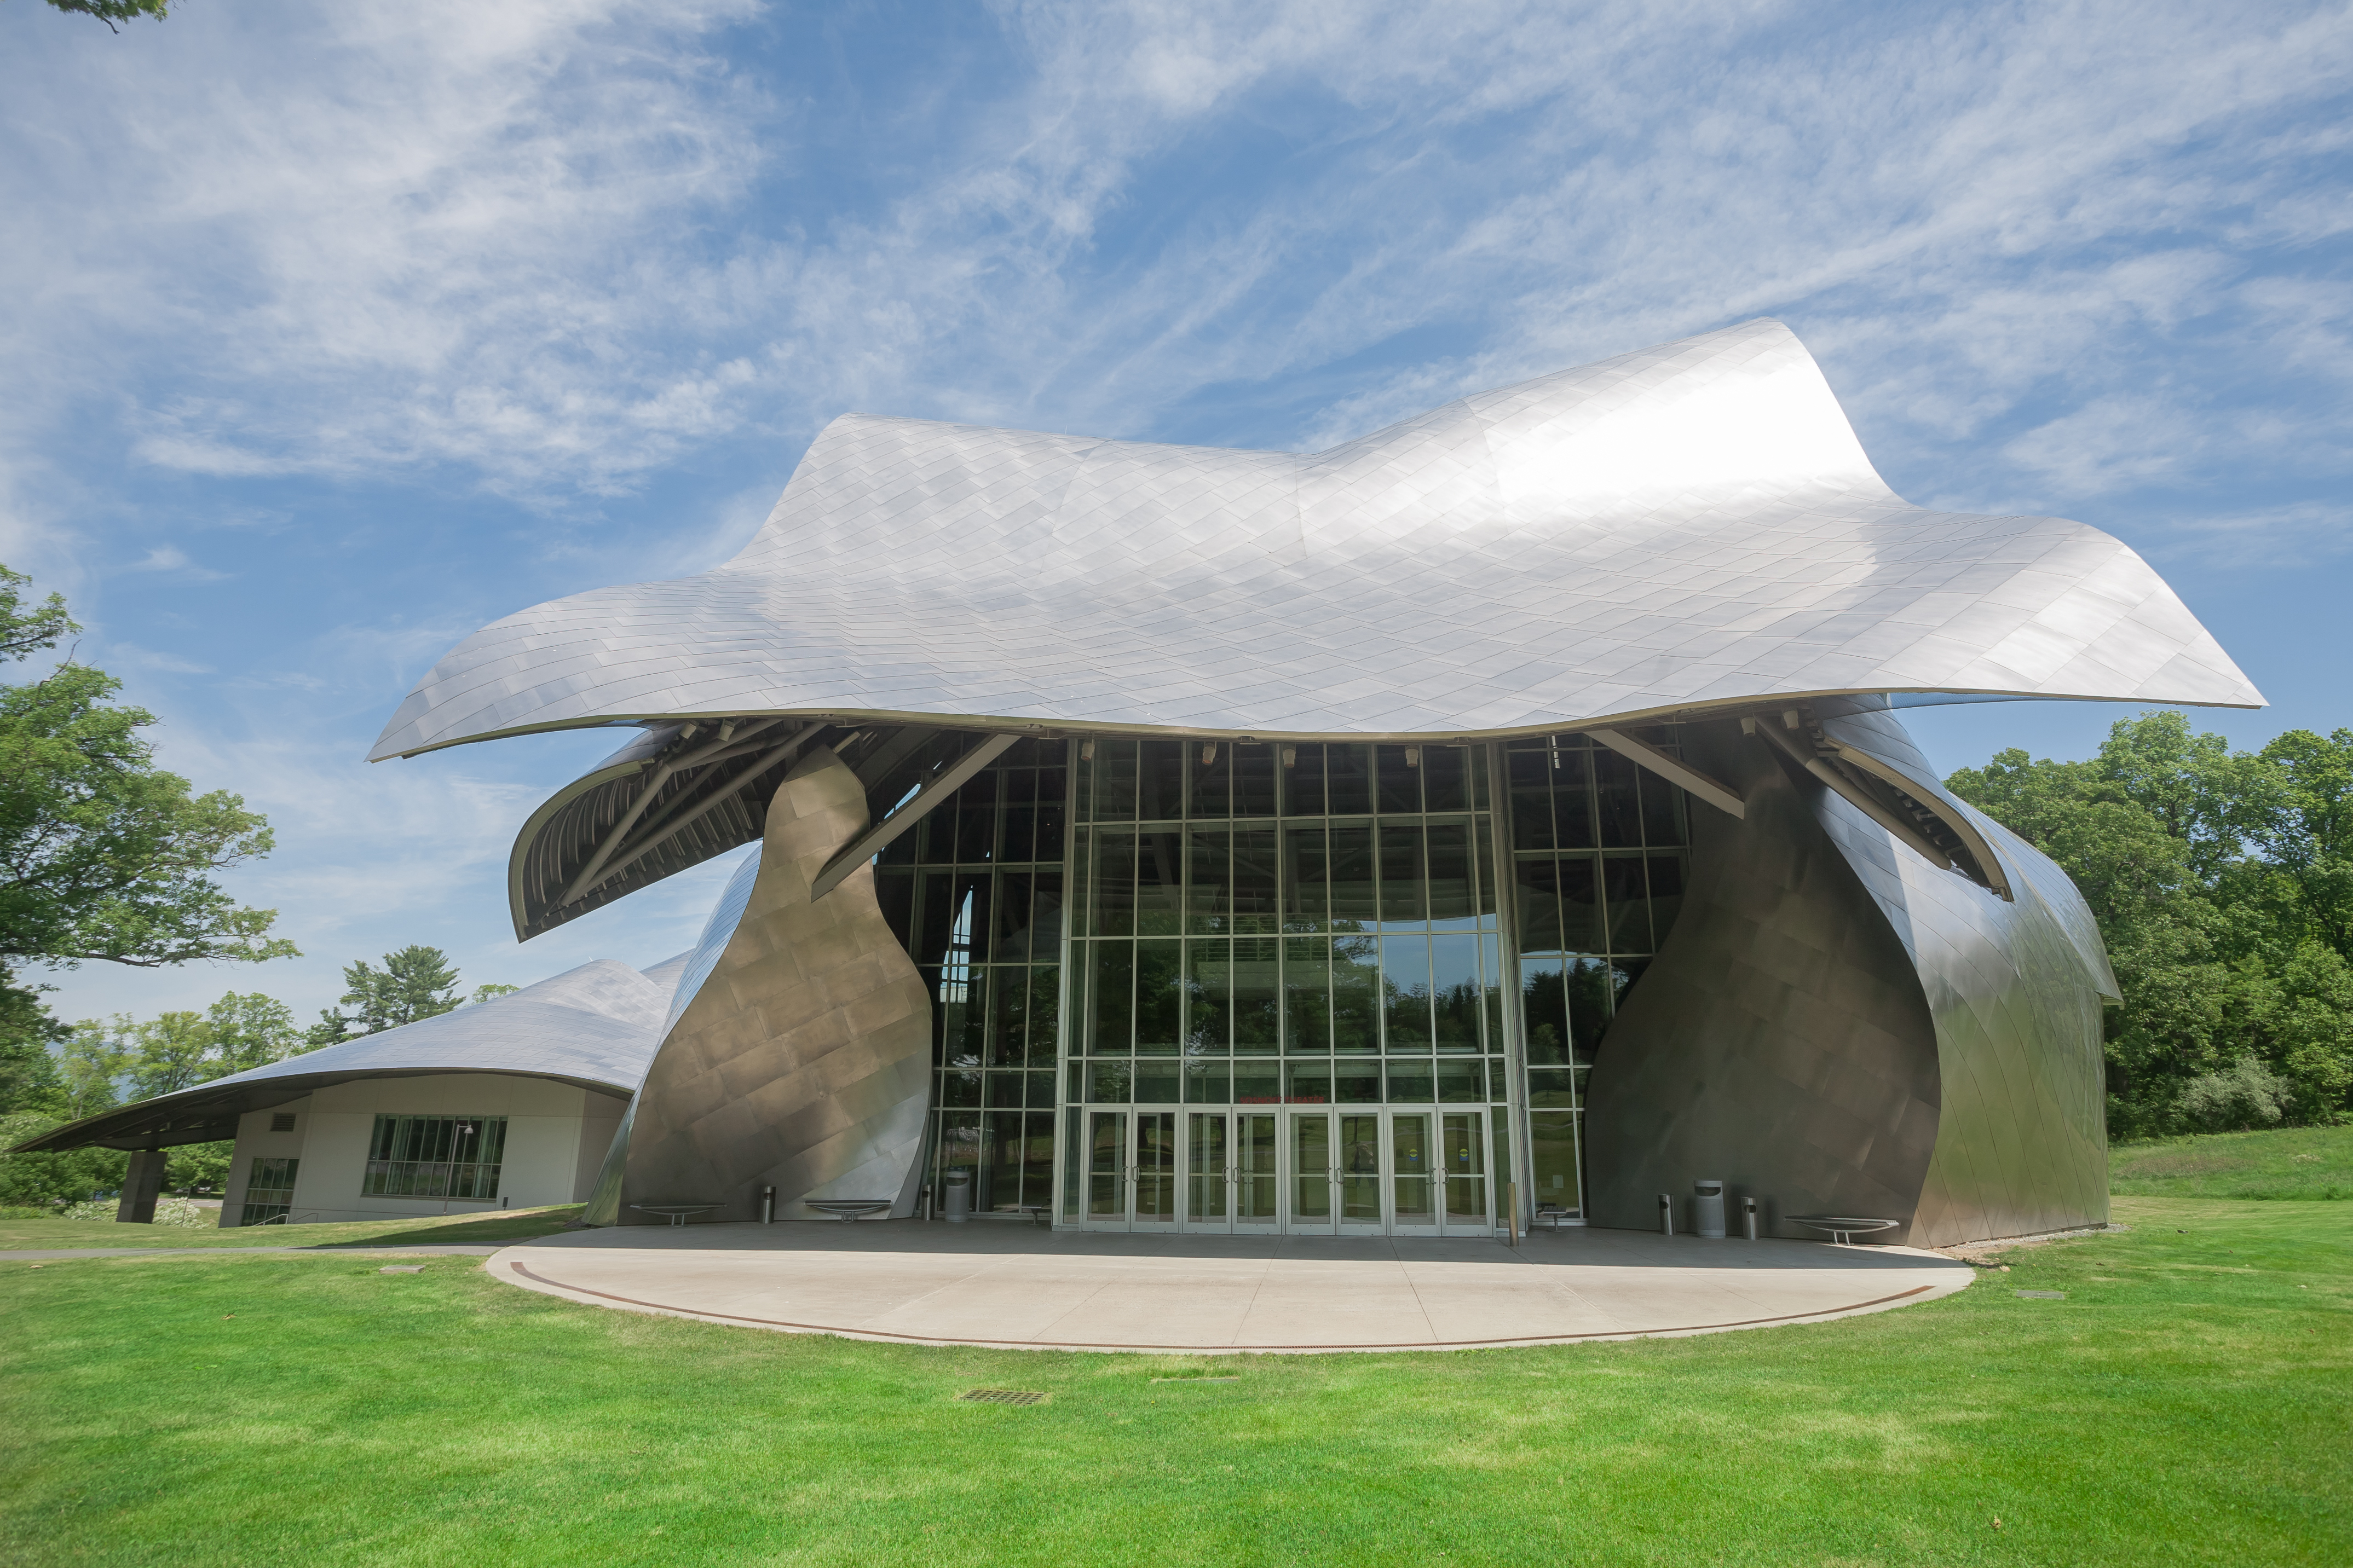 The performing arts building at Bard College, the Fisher Center, designed by Frank Gehry. The roof and walls are curved metal. There is a glass entryway. The building is surrounded by a green grass lawn.